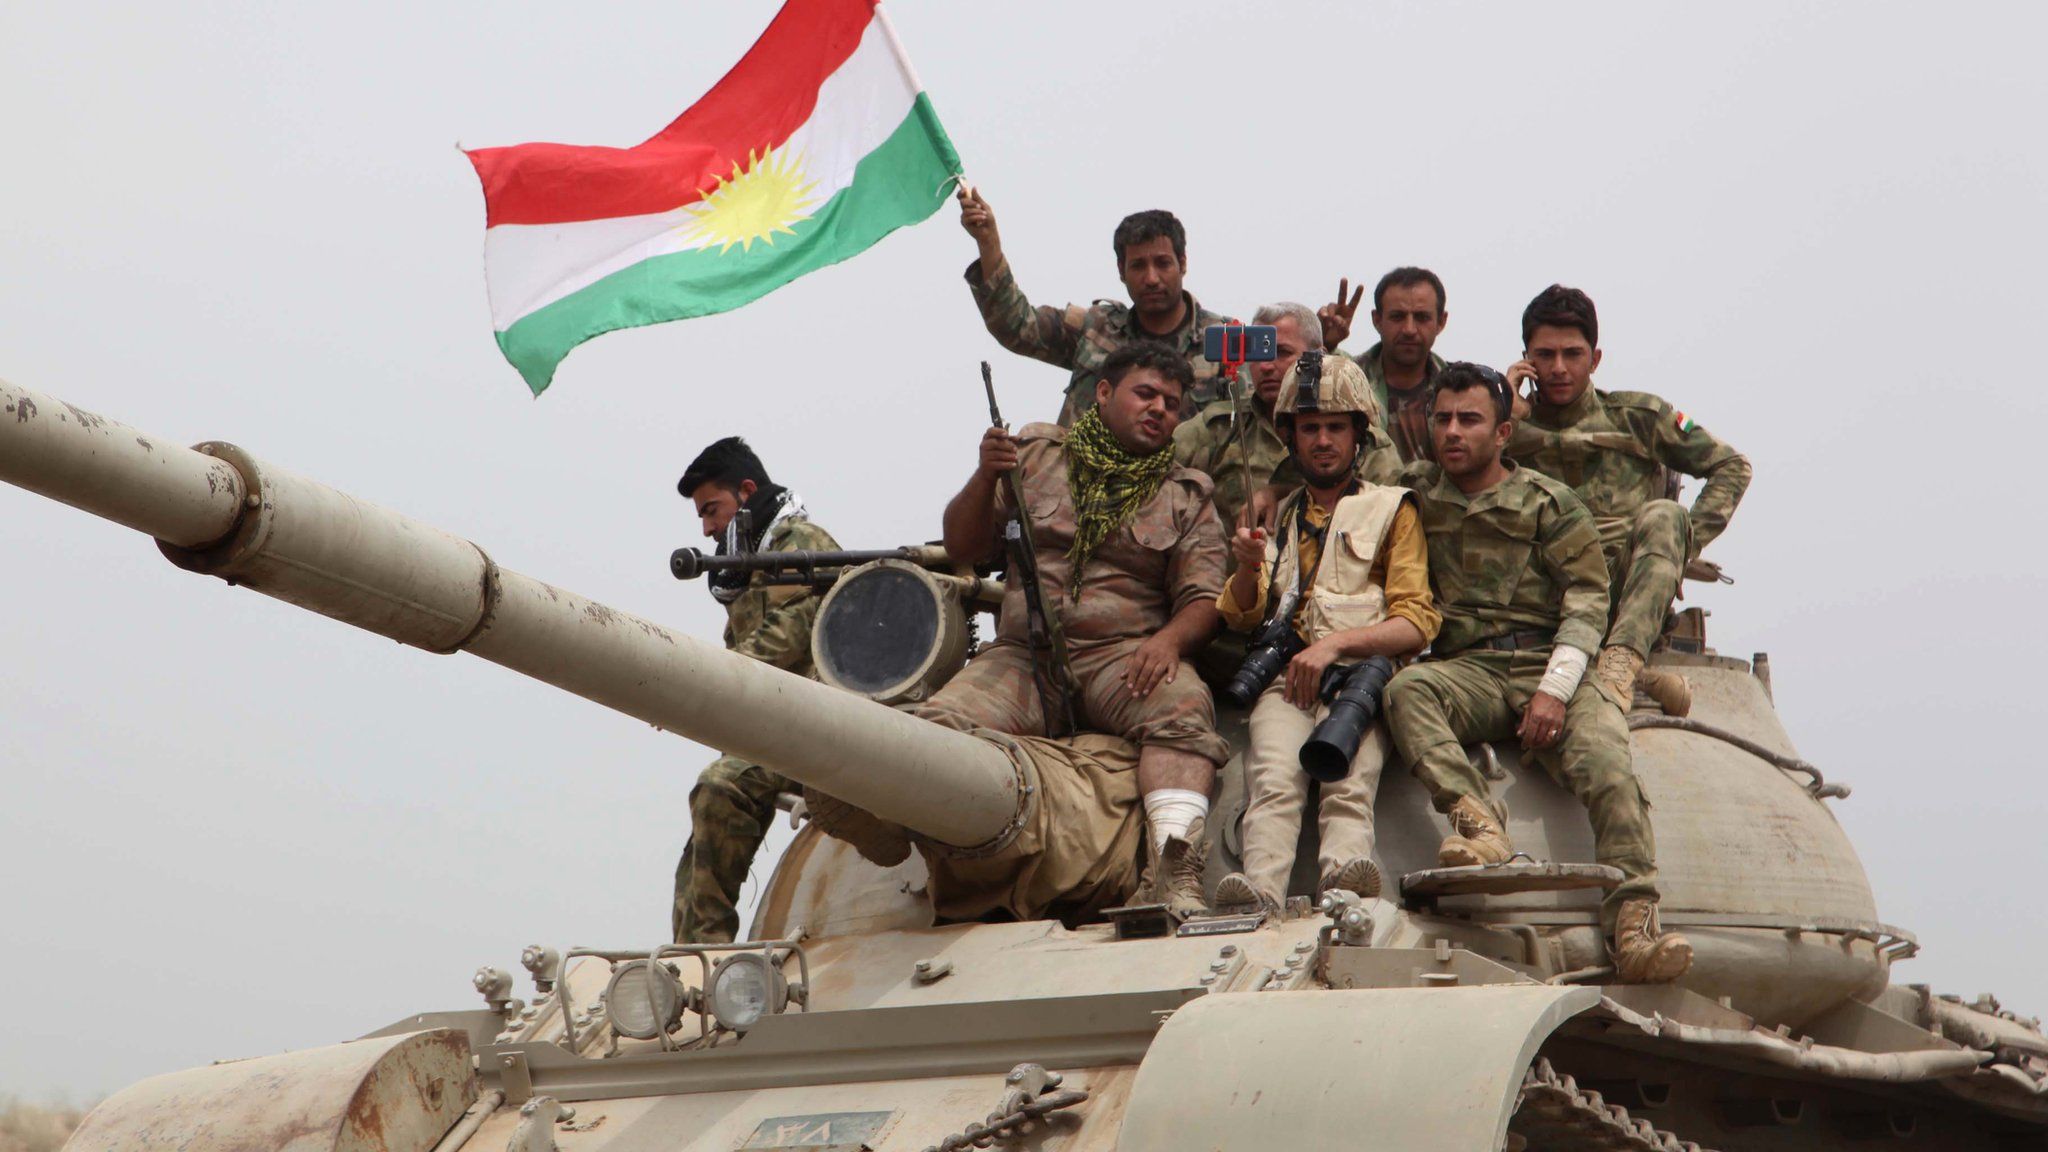 Kurdish forces sit on top of a tank waving the Kurdish flag after recapturing the town of Bashir on 1 May 2016